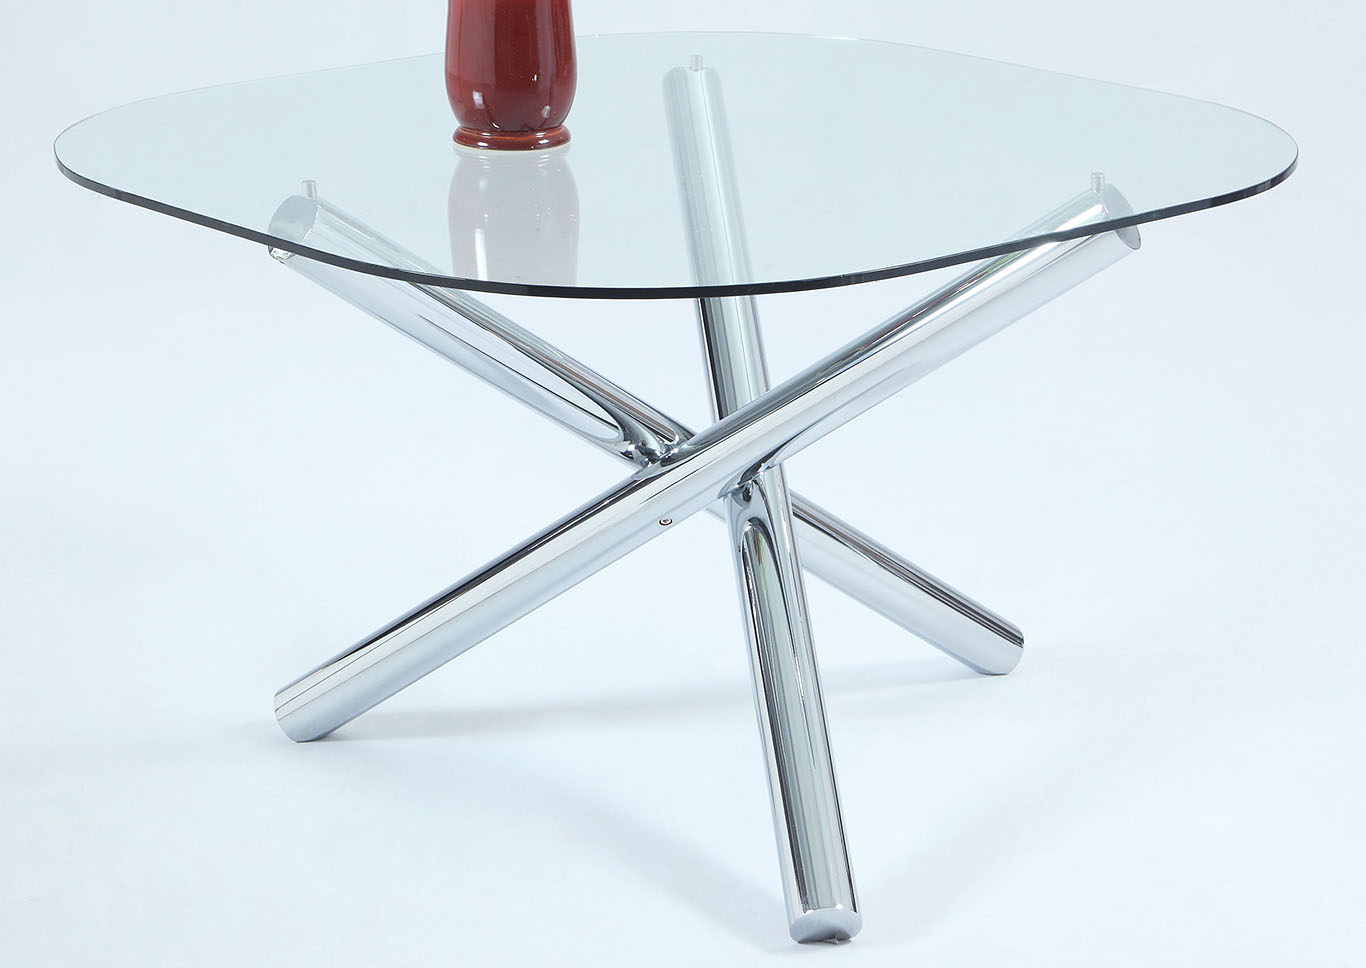 Leatrice Comtemporary Glass Table,Chintaly Imports